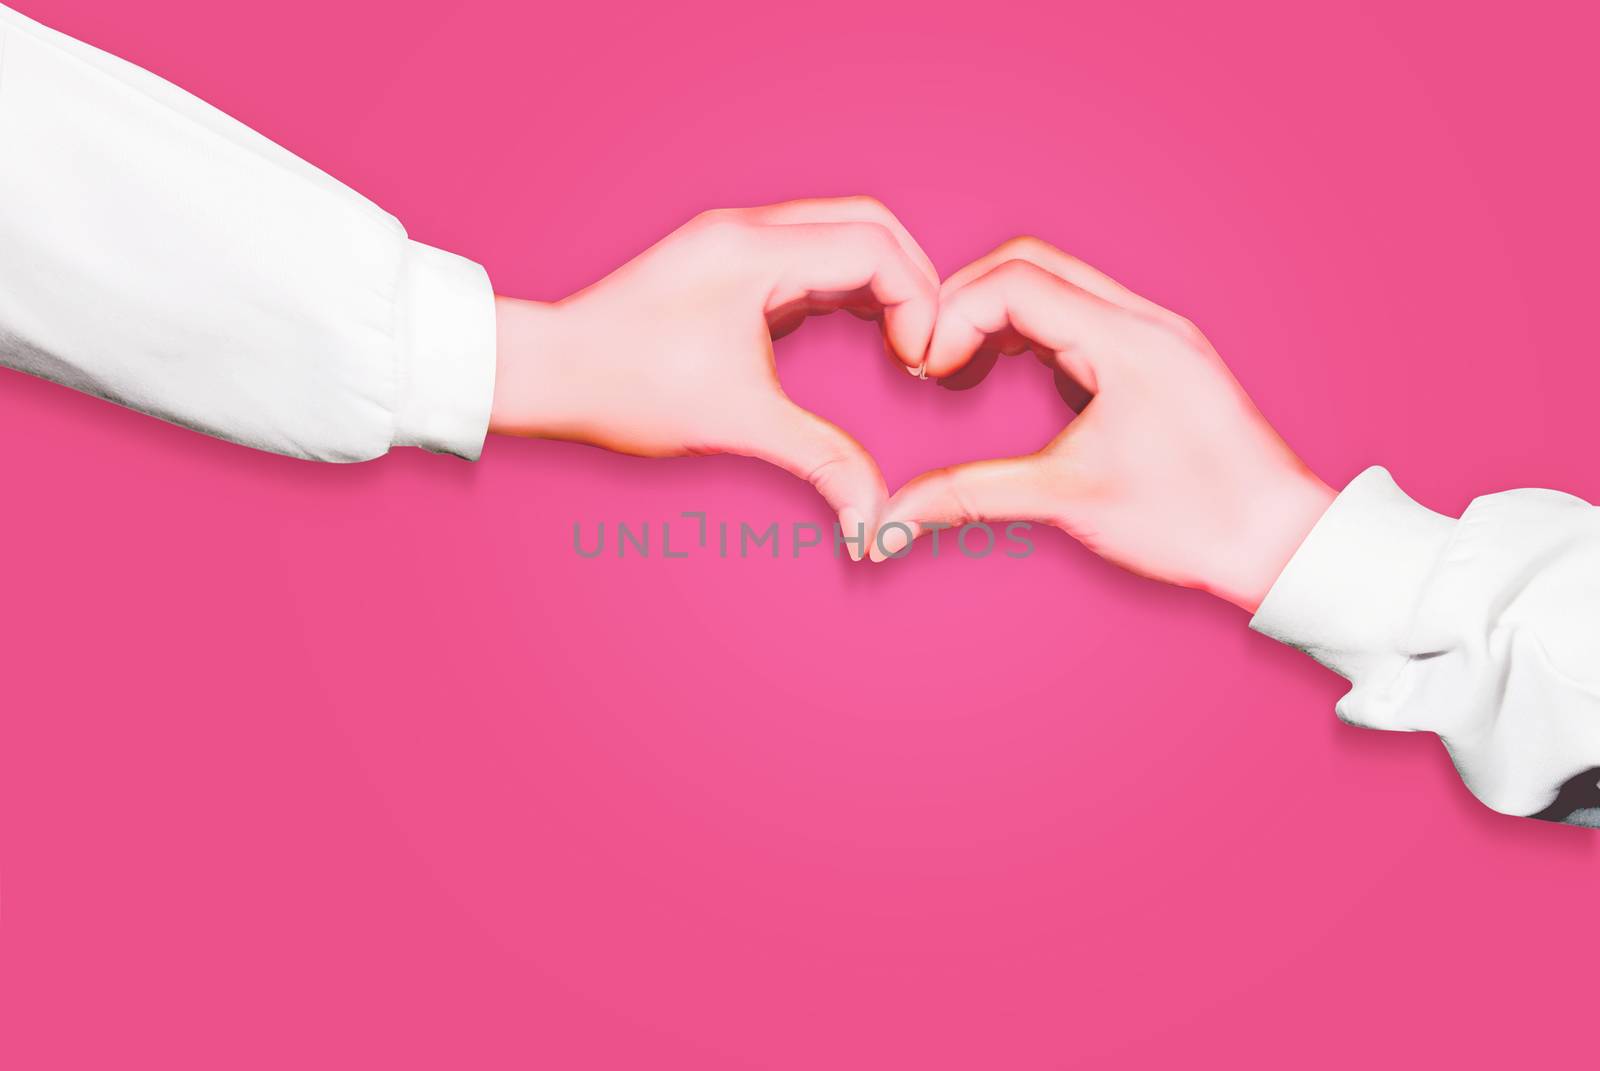 Hands in form of heart isolated on pink background, arms wearing long white sleeves by Hepjam